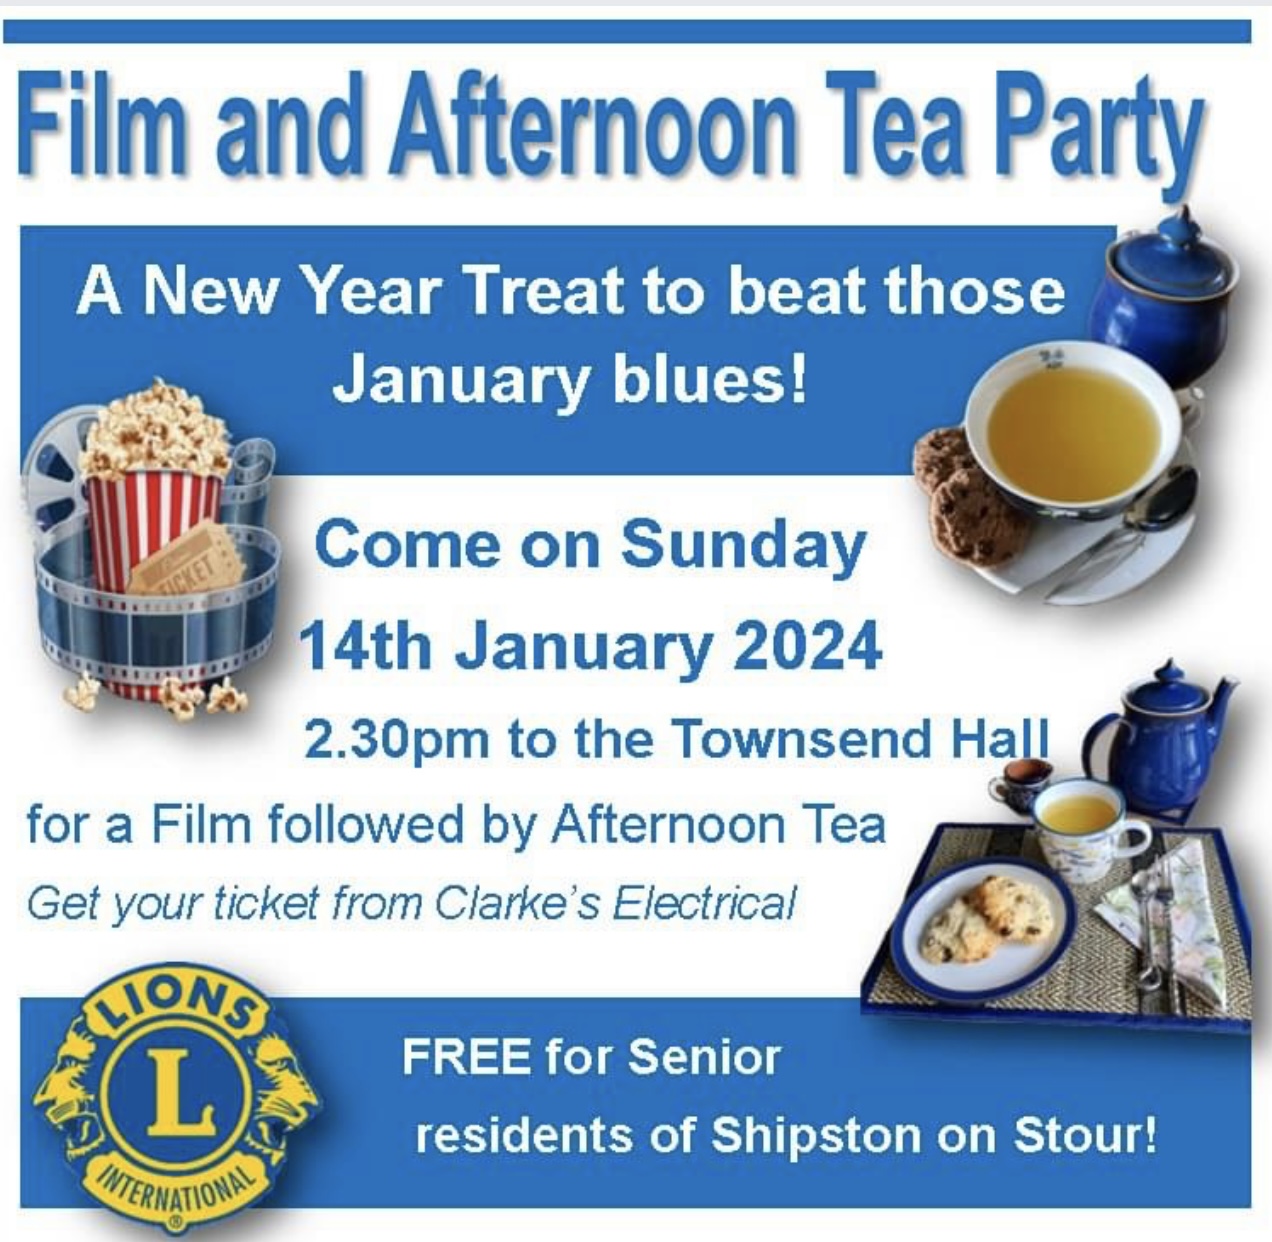 Film and Afternoon Tea Party - Sunday 14 January at Townsend Hall, Shipston on Stour